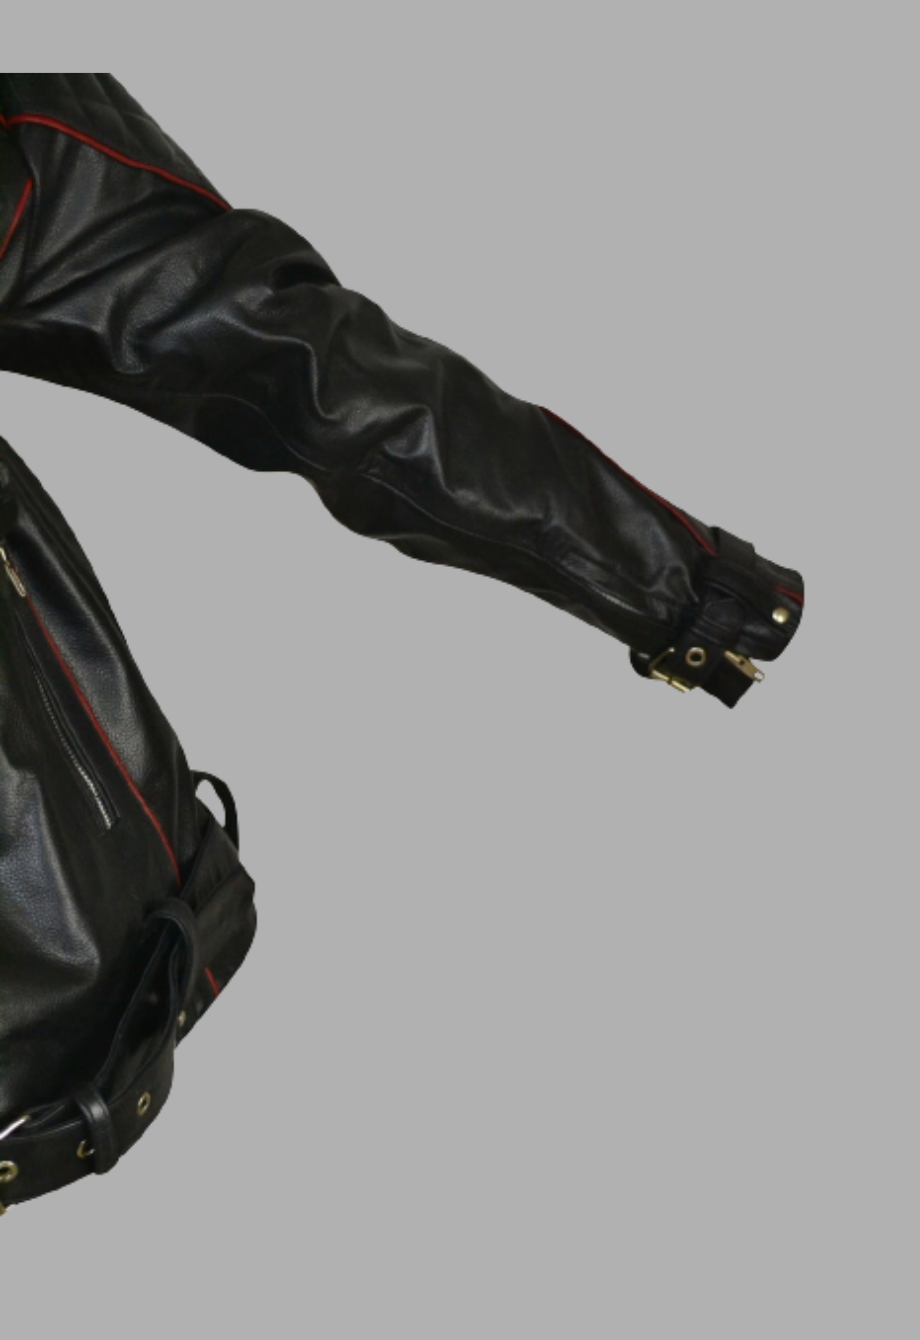 Black Leather Biker Jacket With Red Piping Design